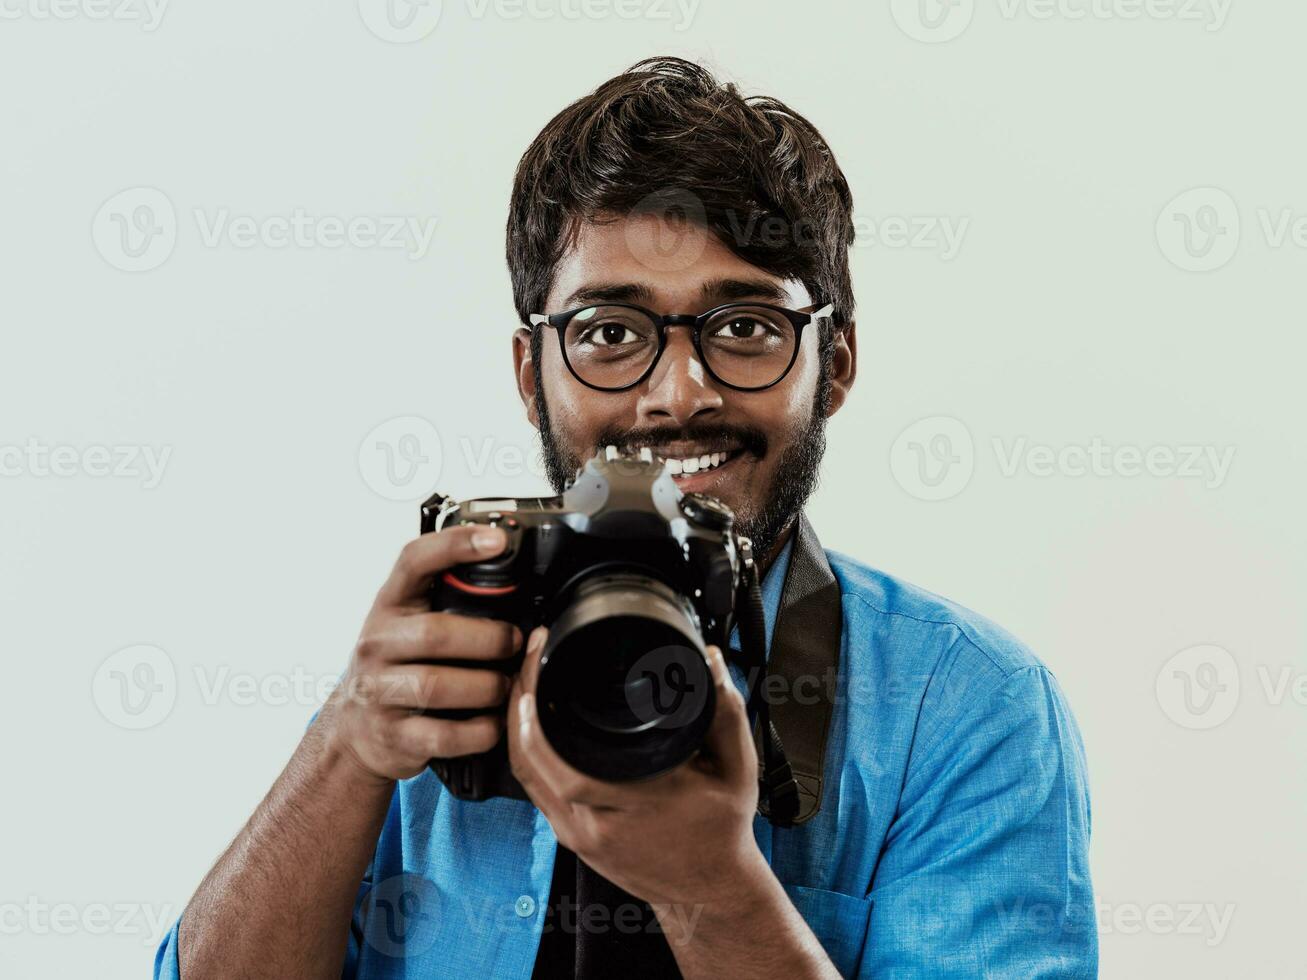 Professional photographer having DSLR camera taking picture.Indian man photography enthusiast taking photo while standing on blue background. Studio shot